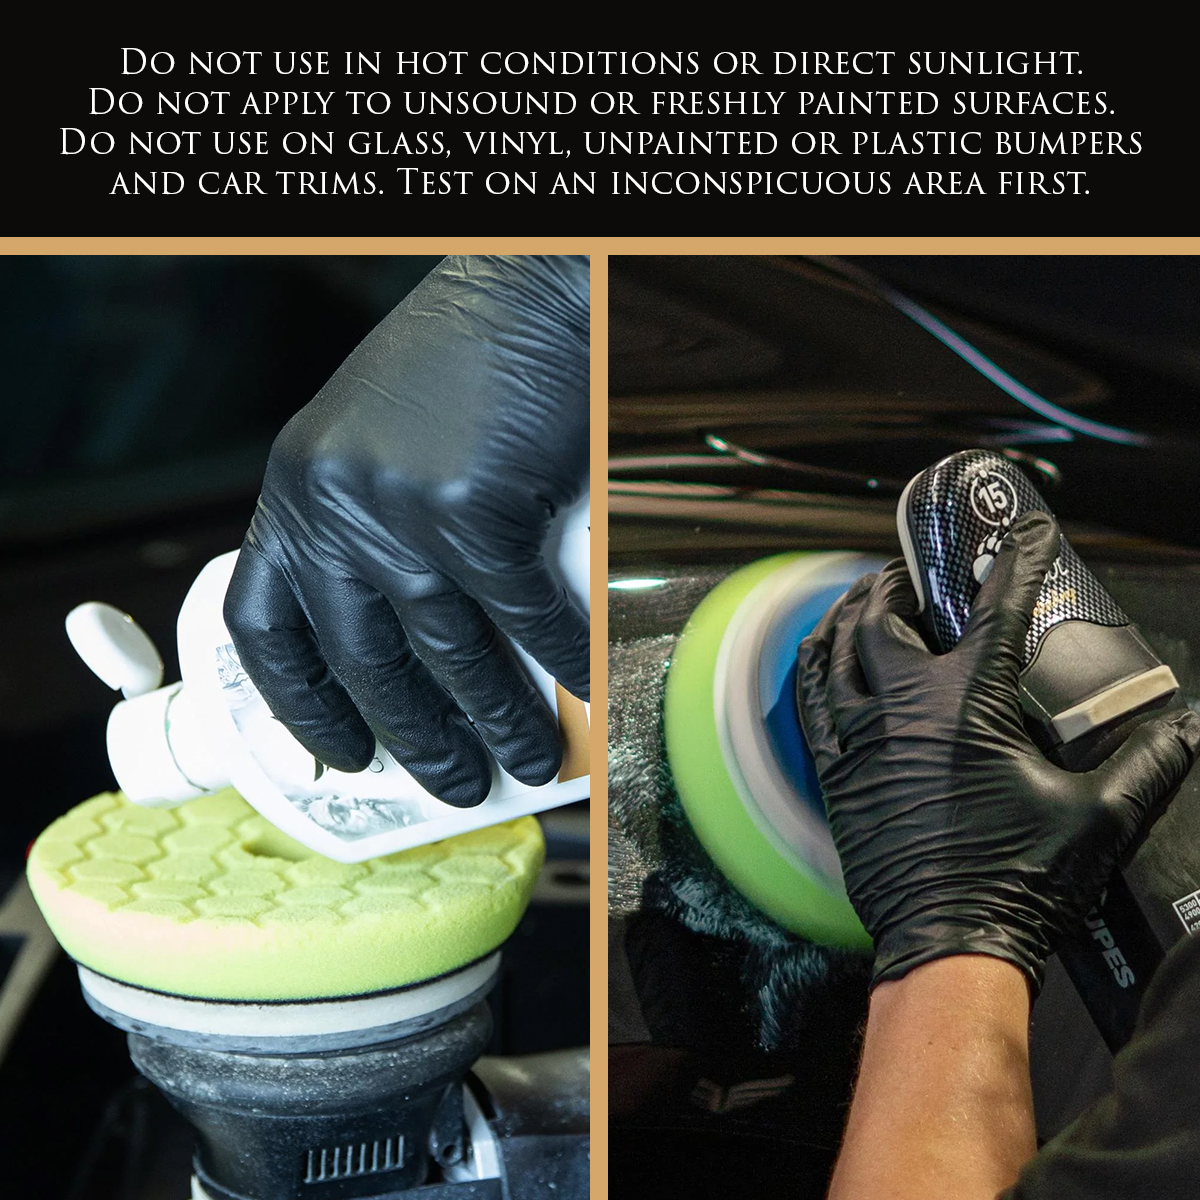 Image shows Car Gods Pure Compound being applied to a vehicle using a machine polisher. Text: Do not use in hot conditions or direct sunlight. Do not apply to unsound or freshly painted surfaces. Do not use on glass, vinyl, unpainted or plastic bumpers and car trims. Test on an inconspicuous area first.